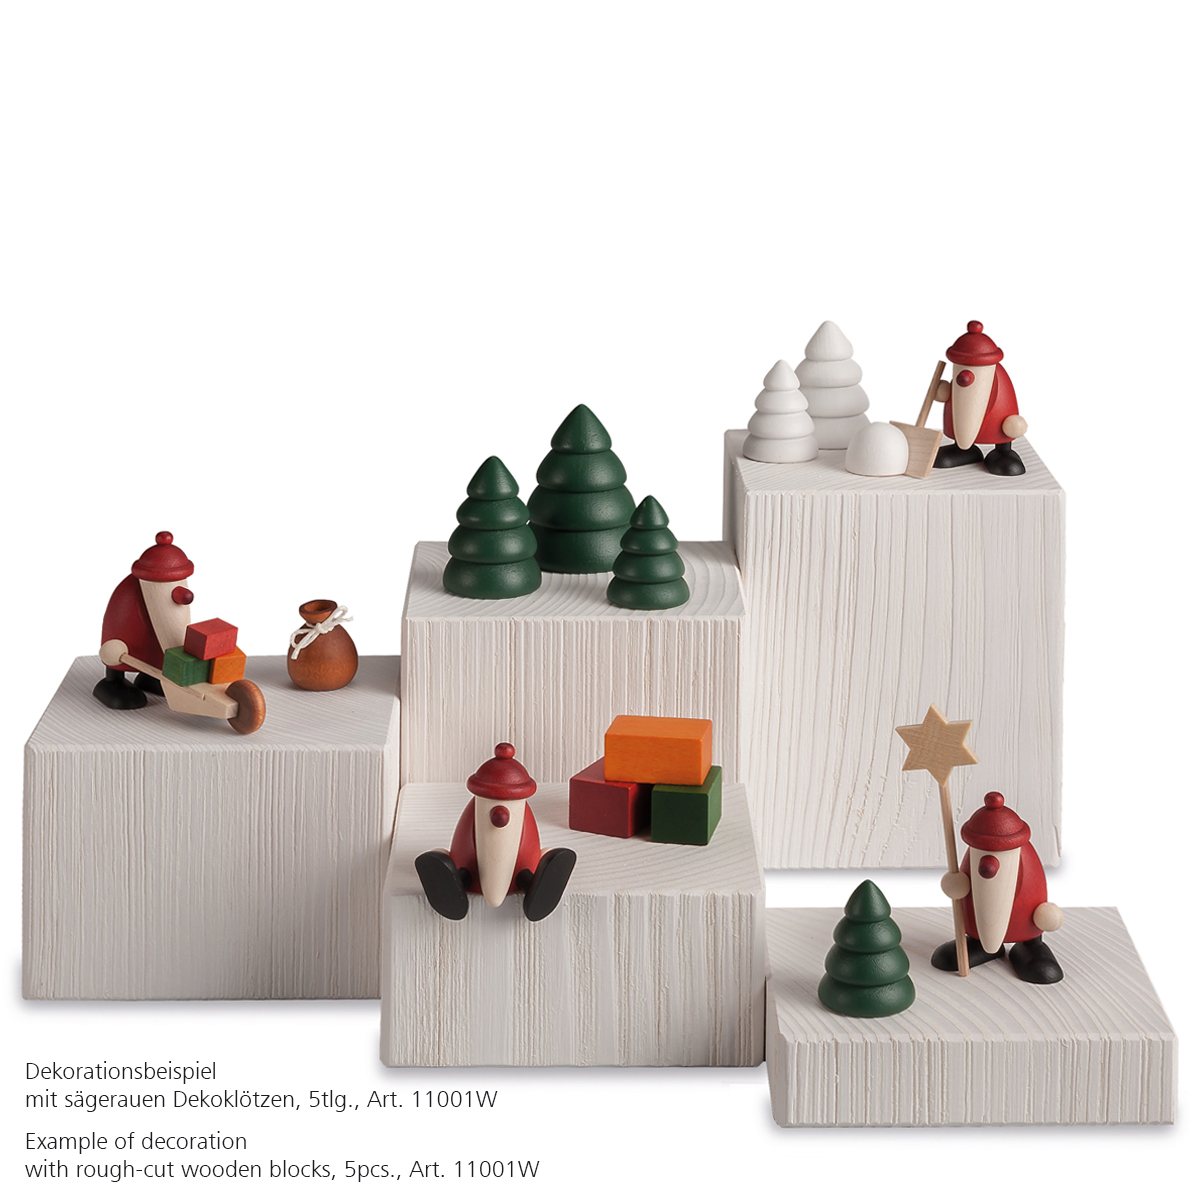 Set 3 | Santa Claus with presents on a barrow and sack